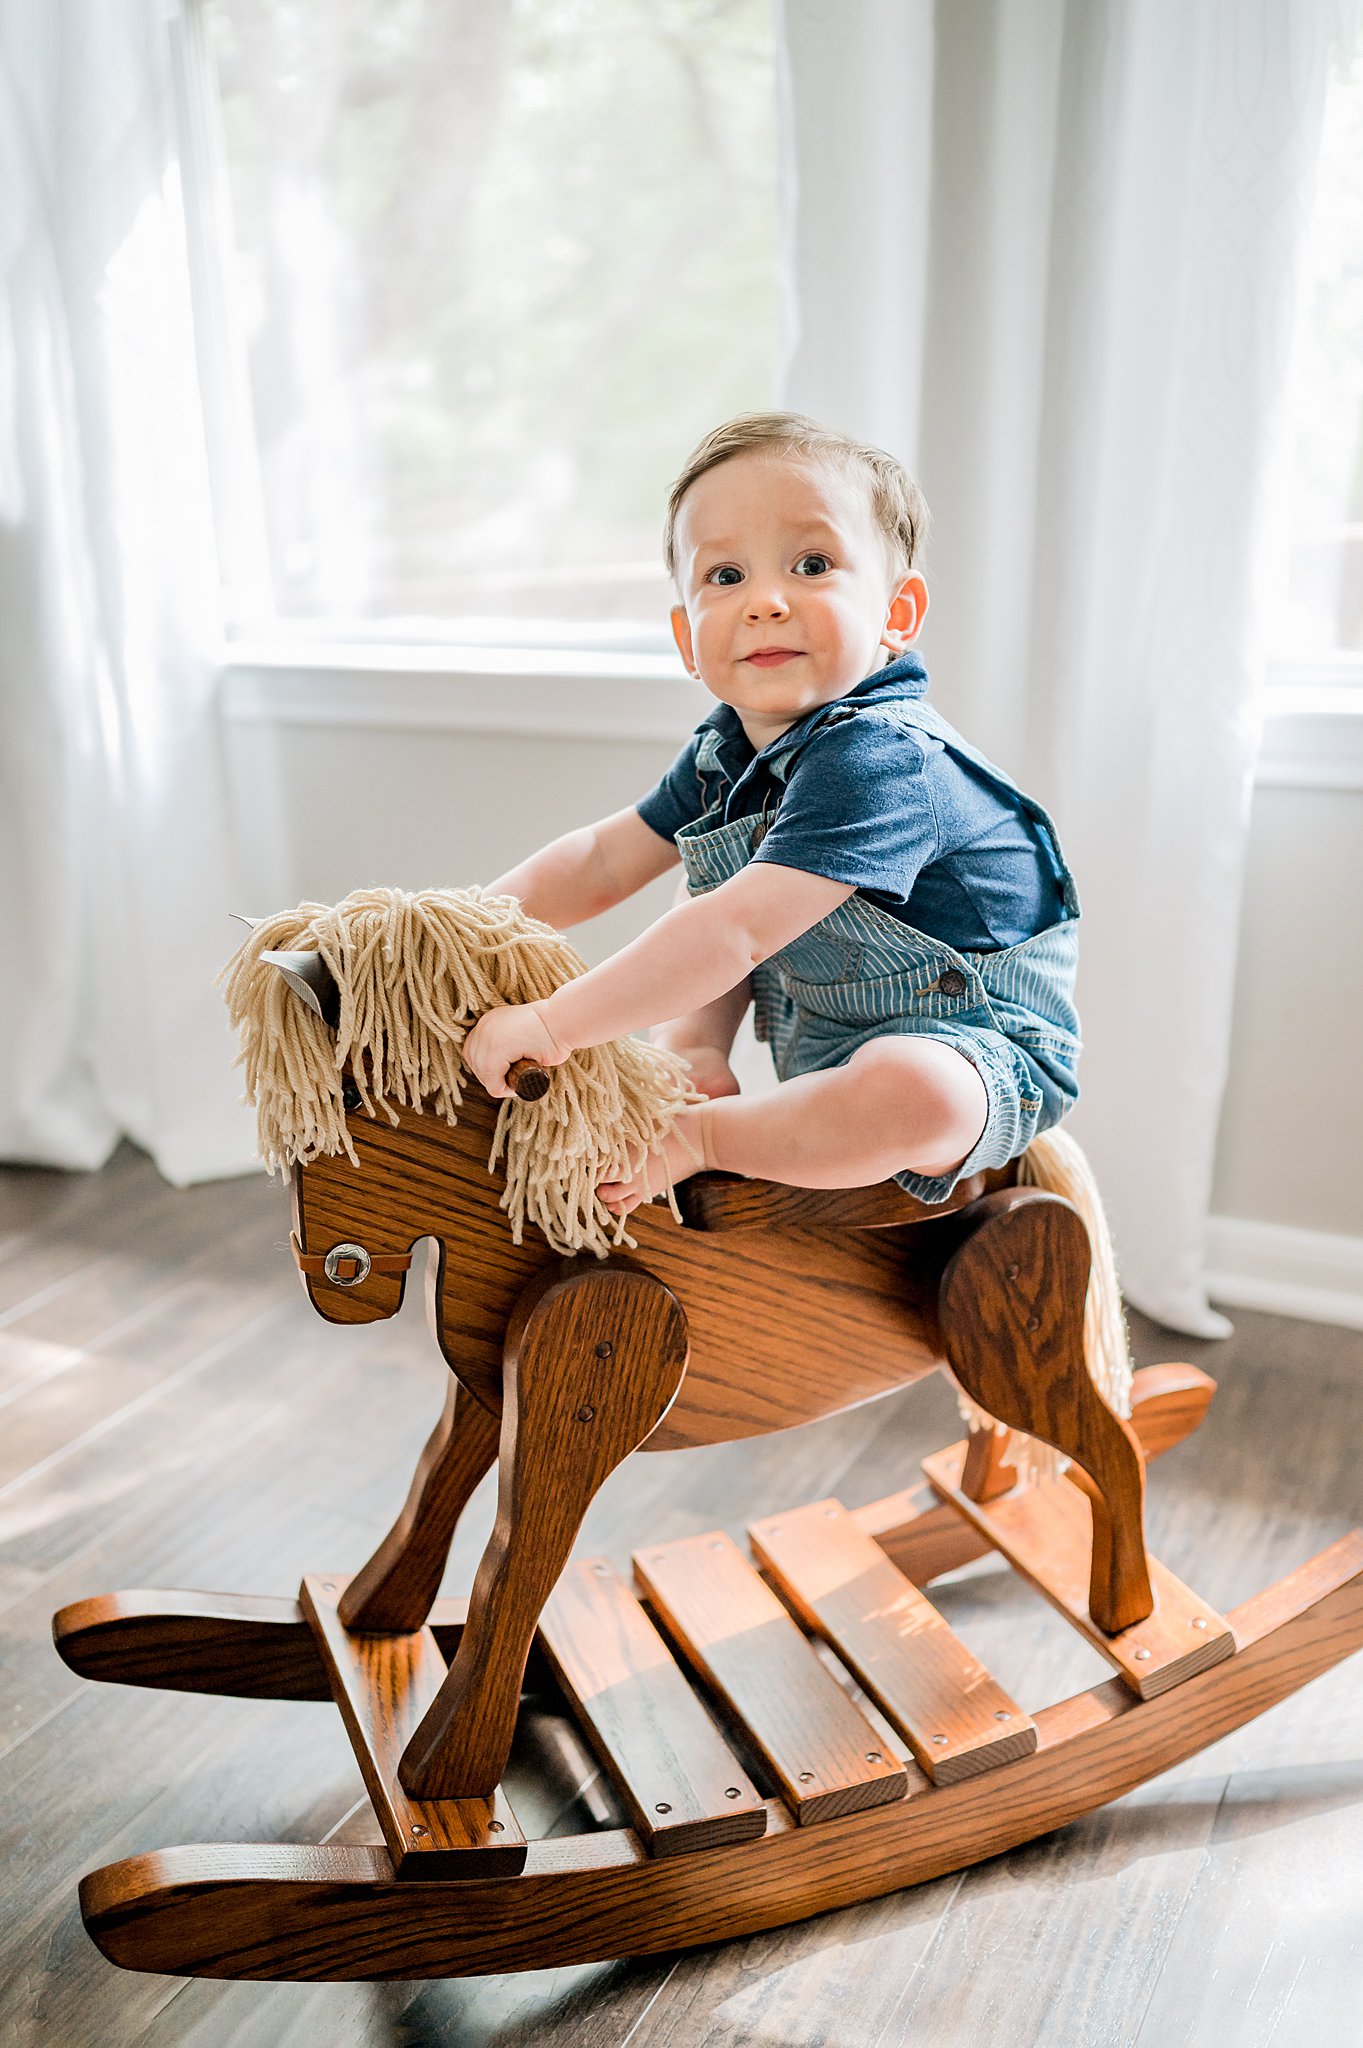 A young boy in blue overalls plays on a wooden rocking horse in front of large windows san antonio toy stores